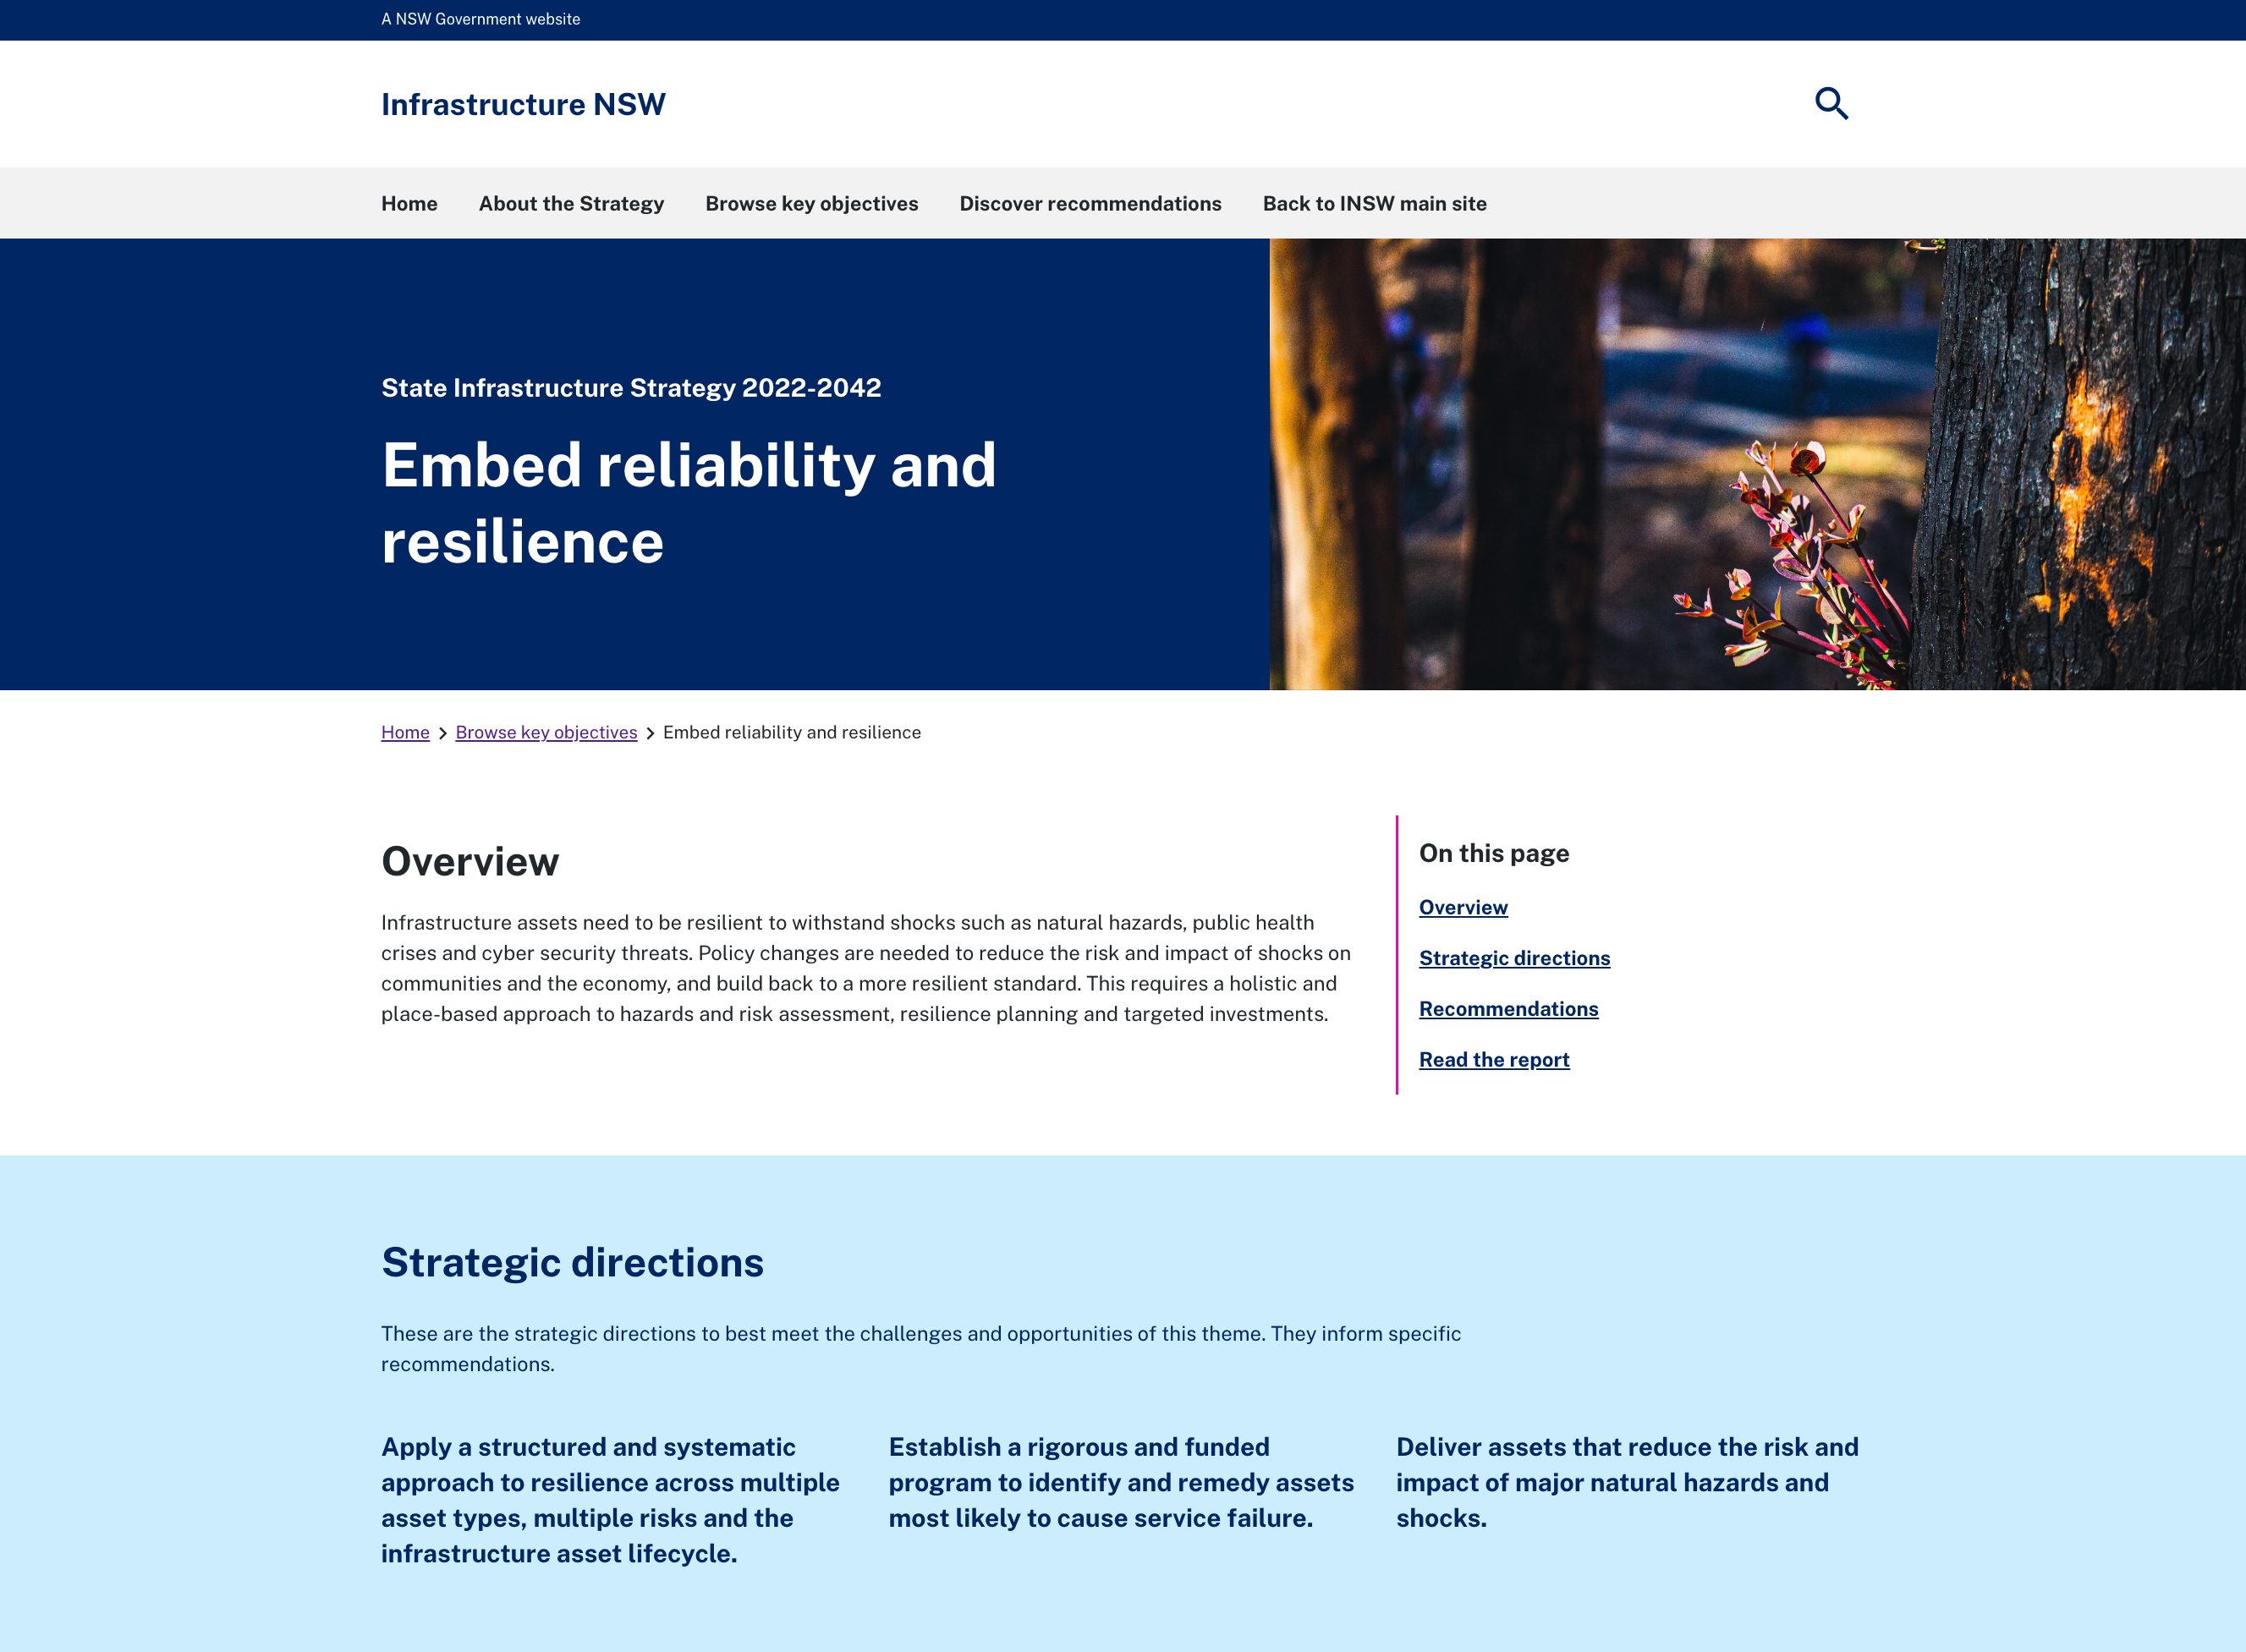 The profile of a key theme from the State Infrastructure Strategy website